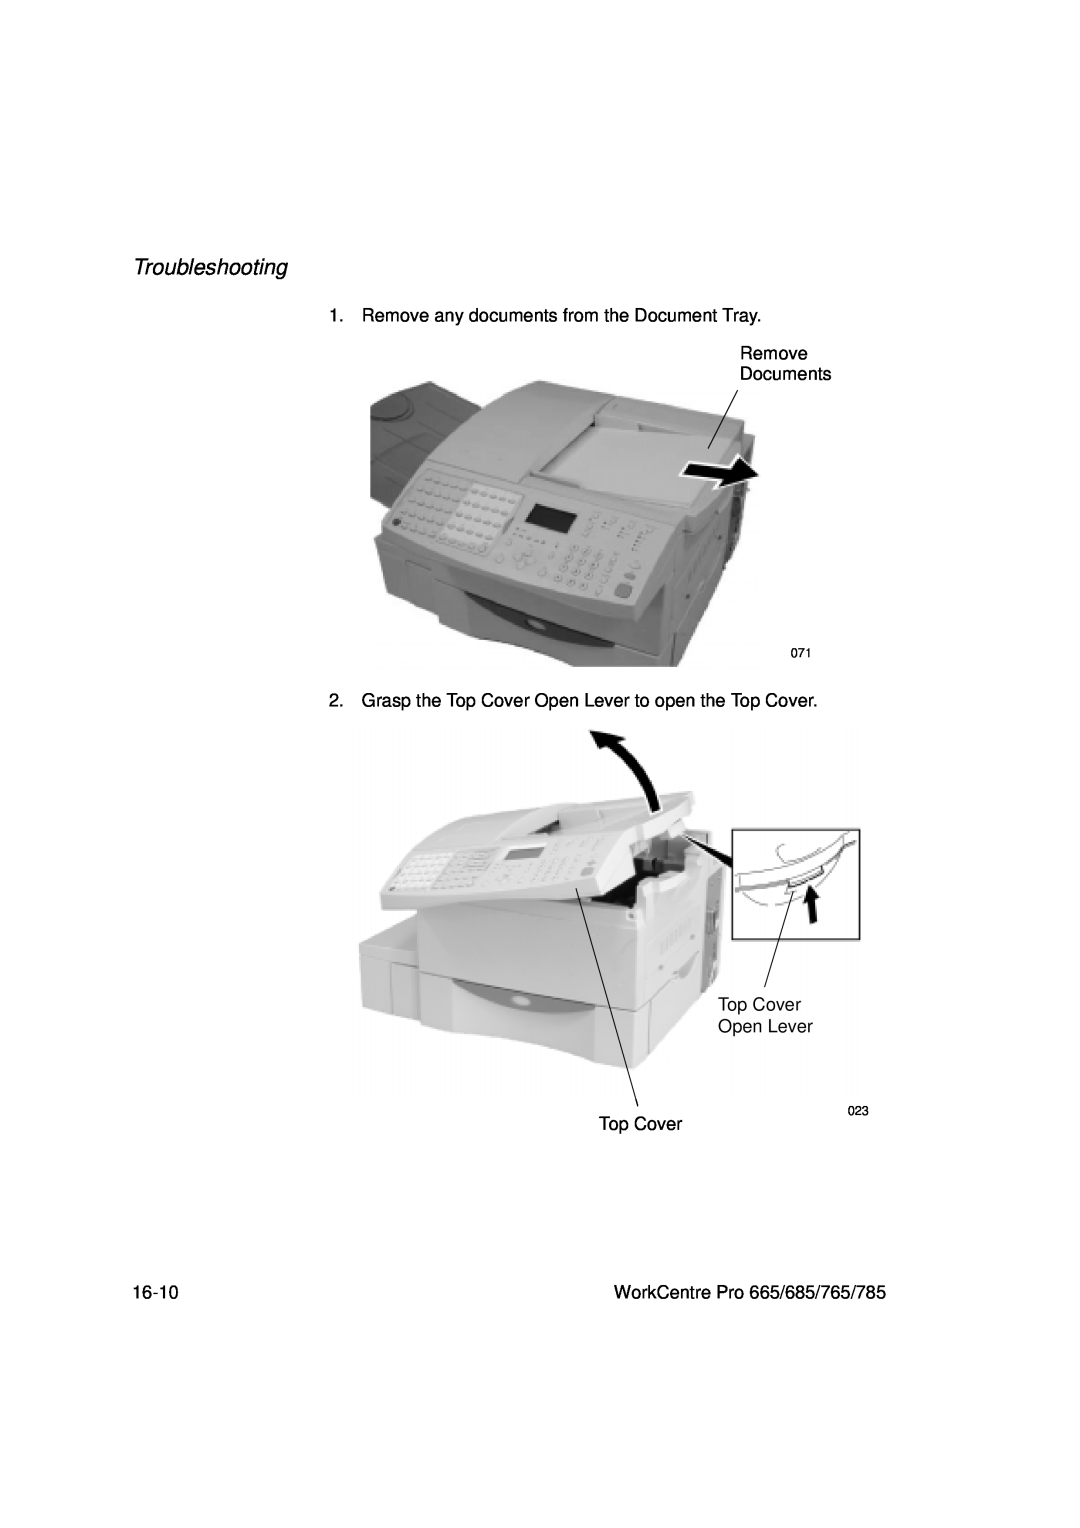 Xerox 685, 765 Troubleshooting, Remove any documents from the Document Tray, Remove Documents, Top Cover Open Lever, 16-10 